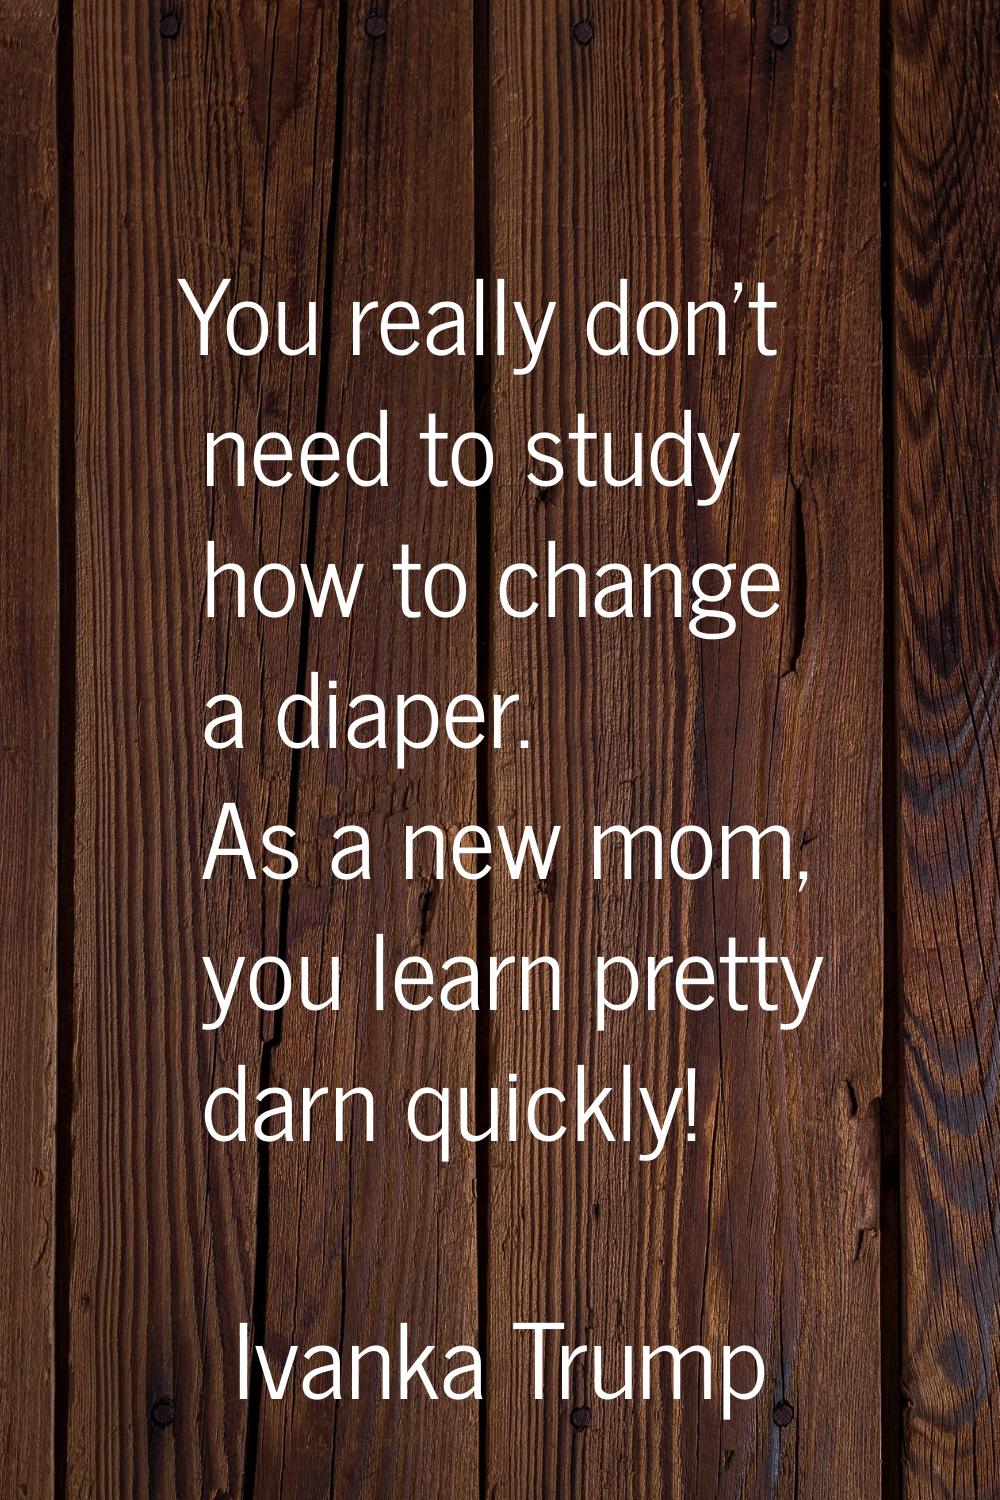 You really don't need to study how to change a diaper. As a new mom, you learn pretty darn quickly!